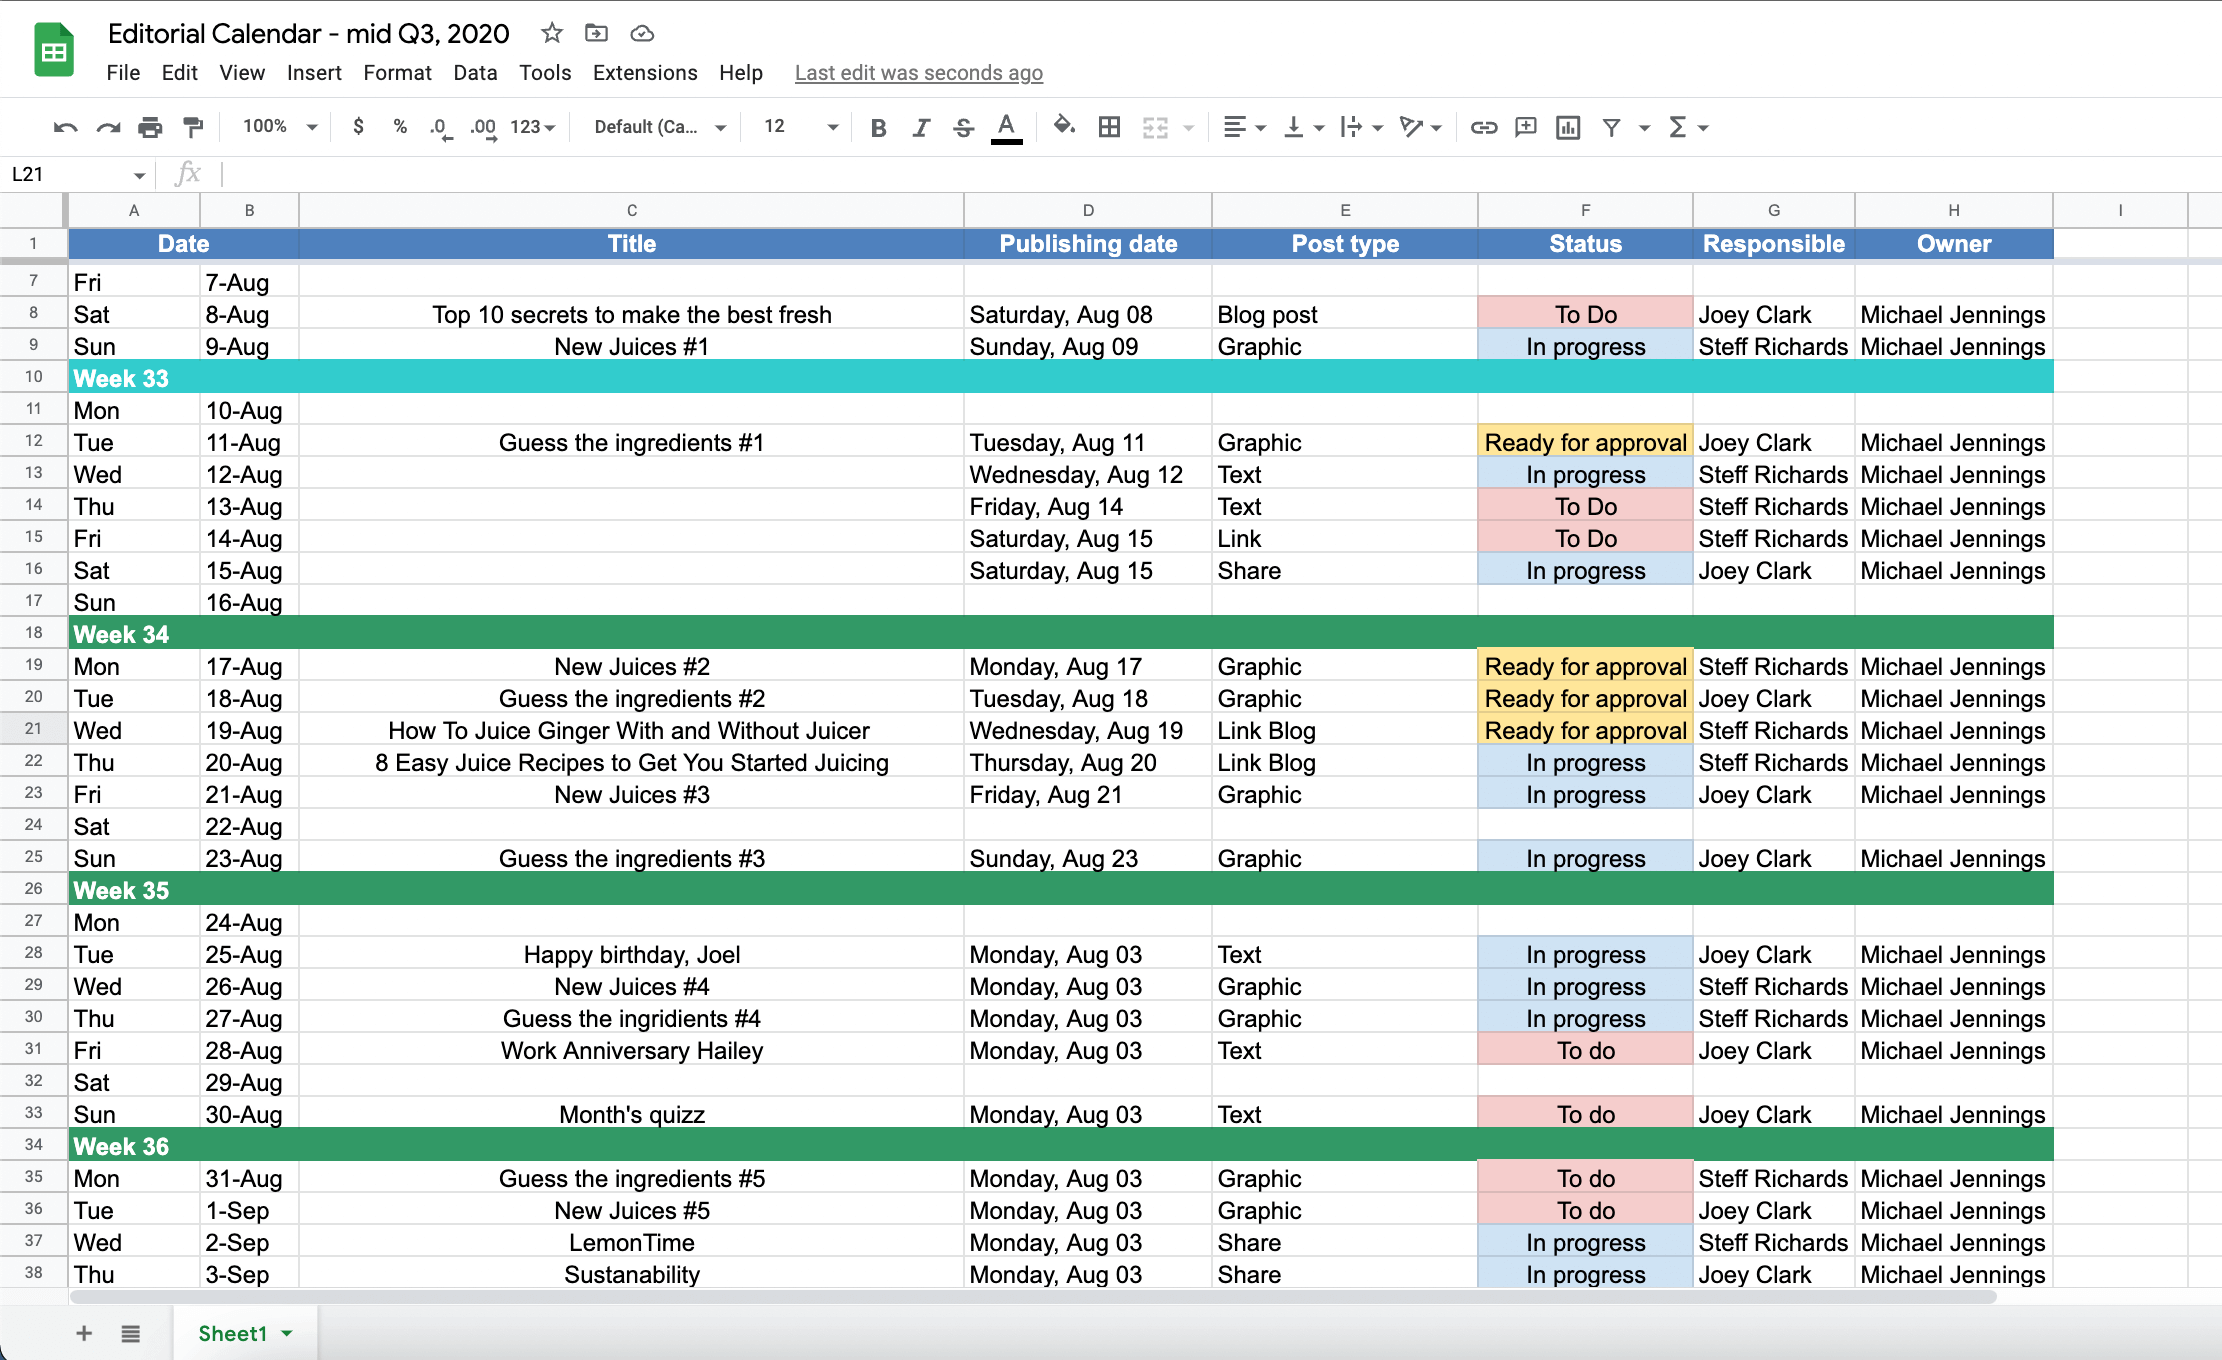 spreadsheet containing a social media calendar broken down by weeks and including the publishing date, post type, status and owner